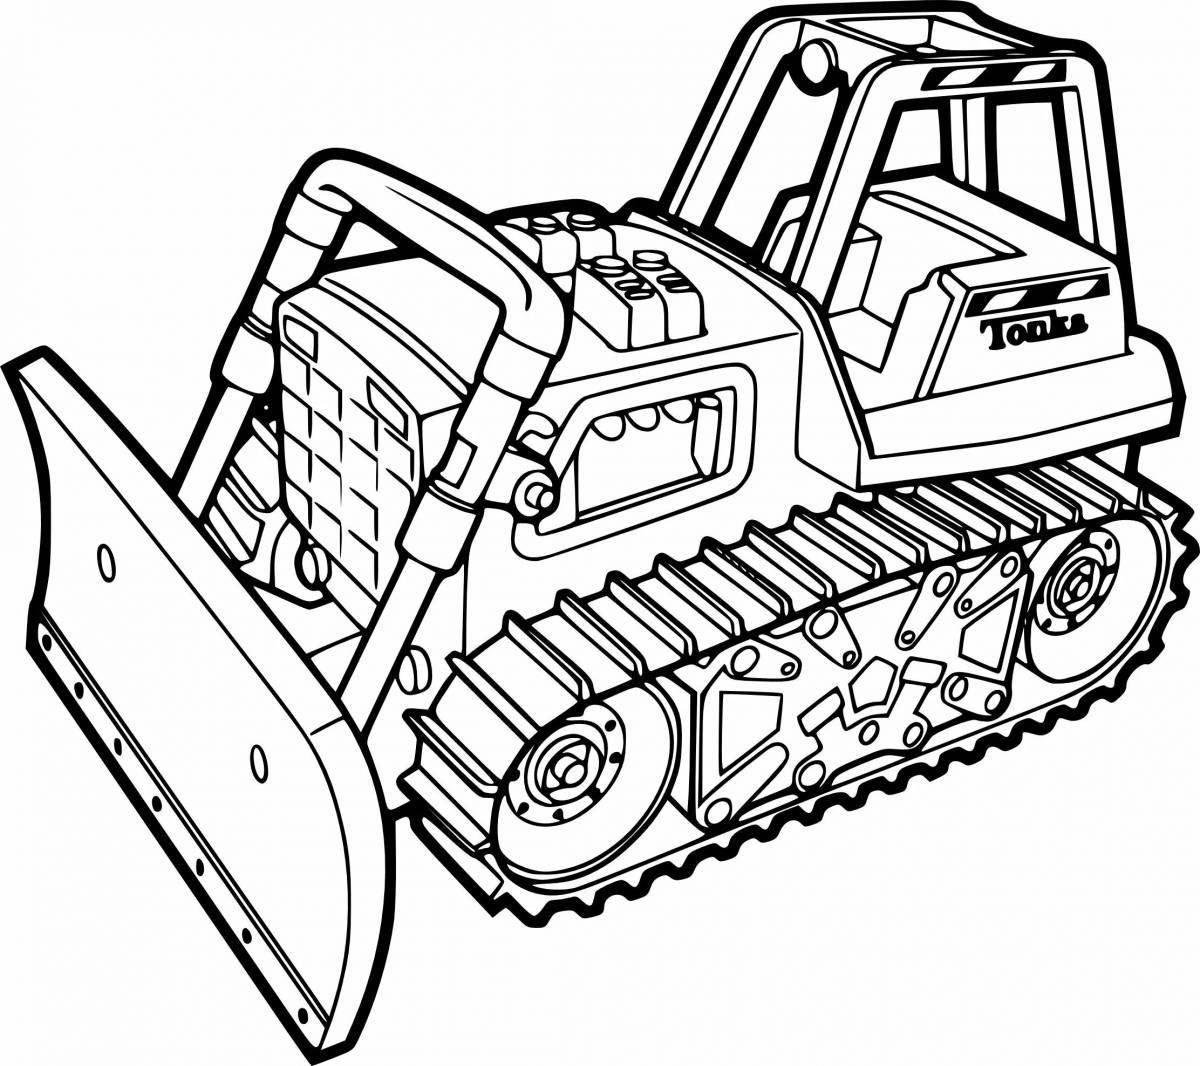 Robot tractor dramatic coloring page